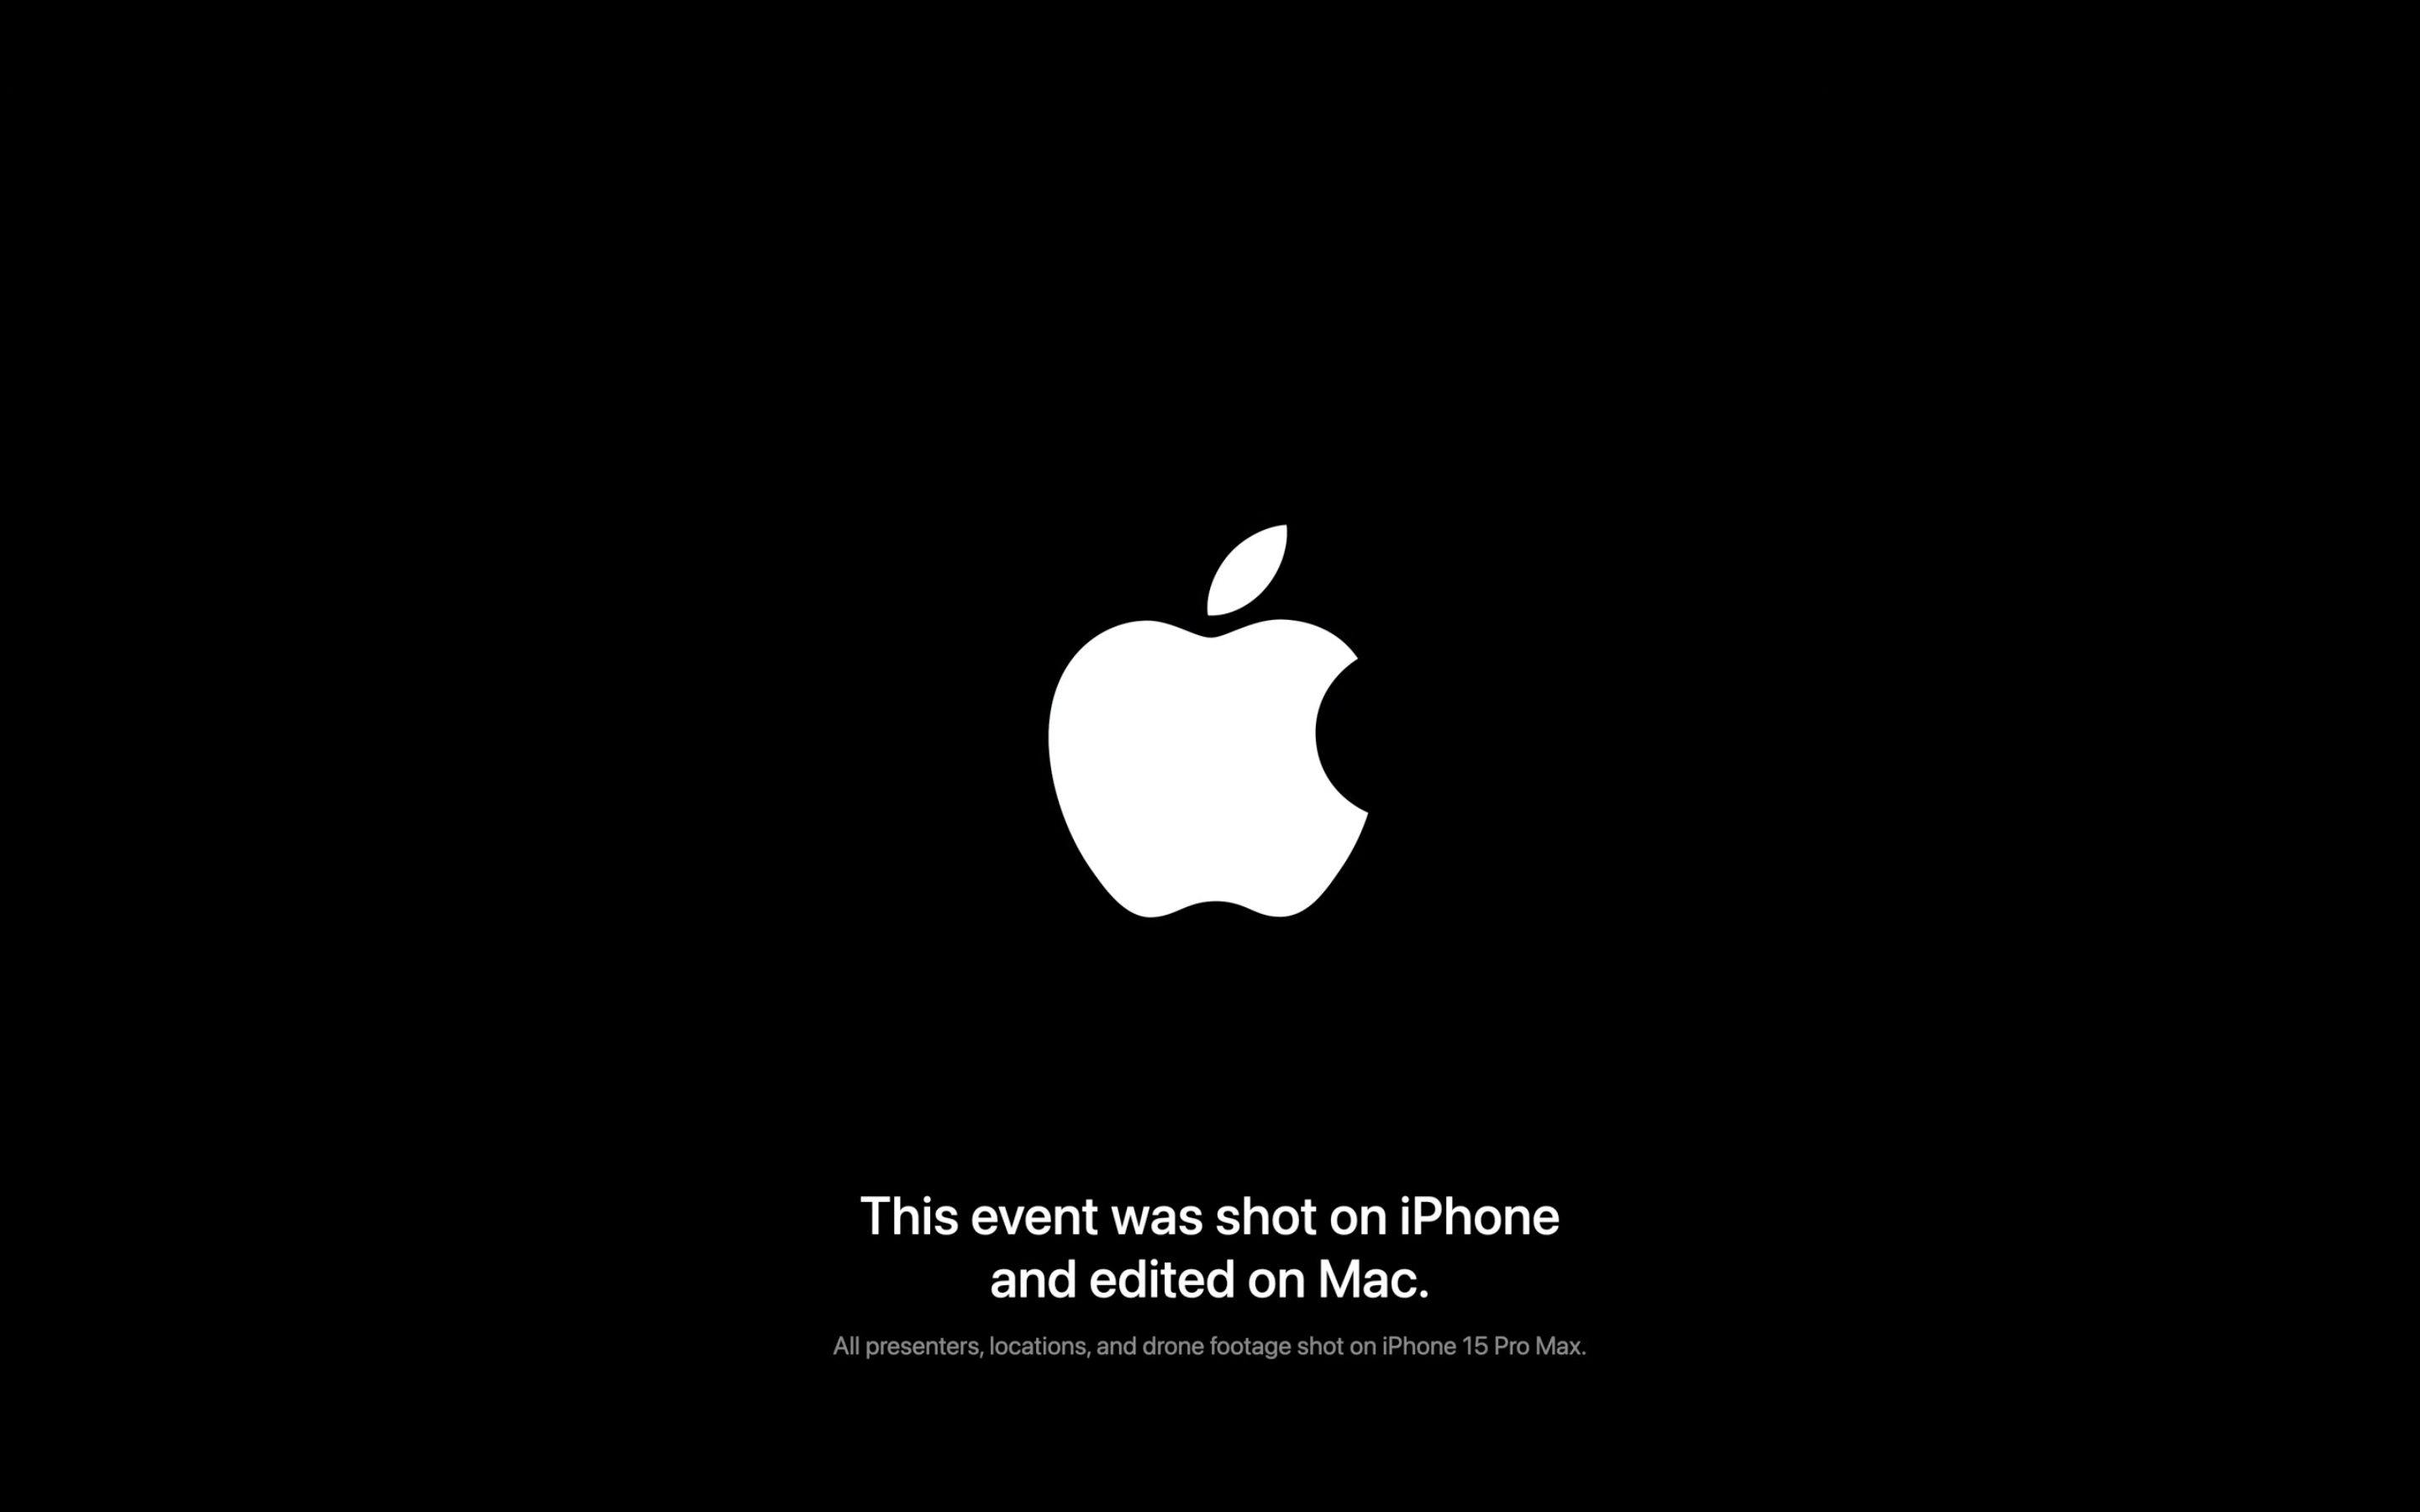 Apple Scary Fast event end card showing the event was shot on iPhone.